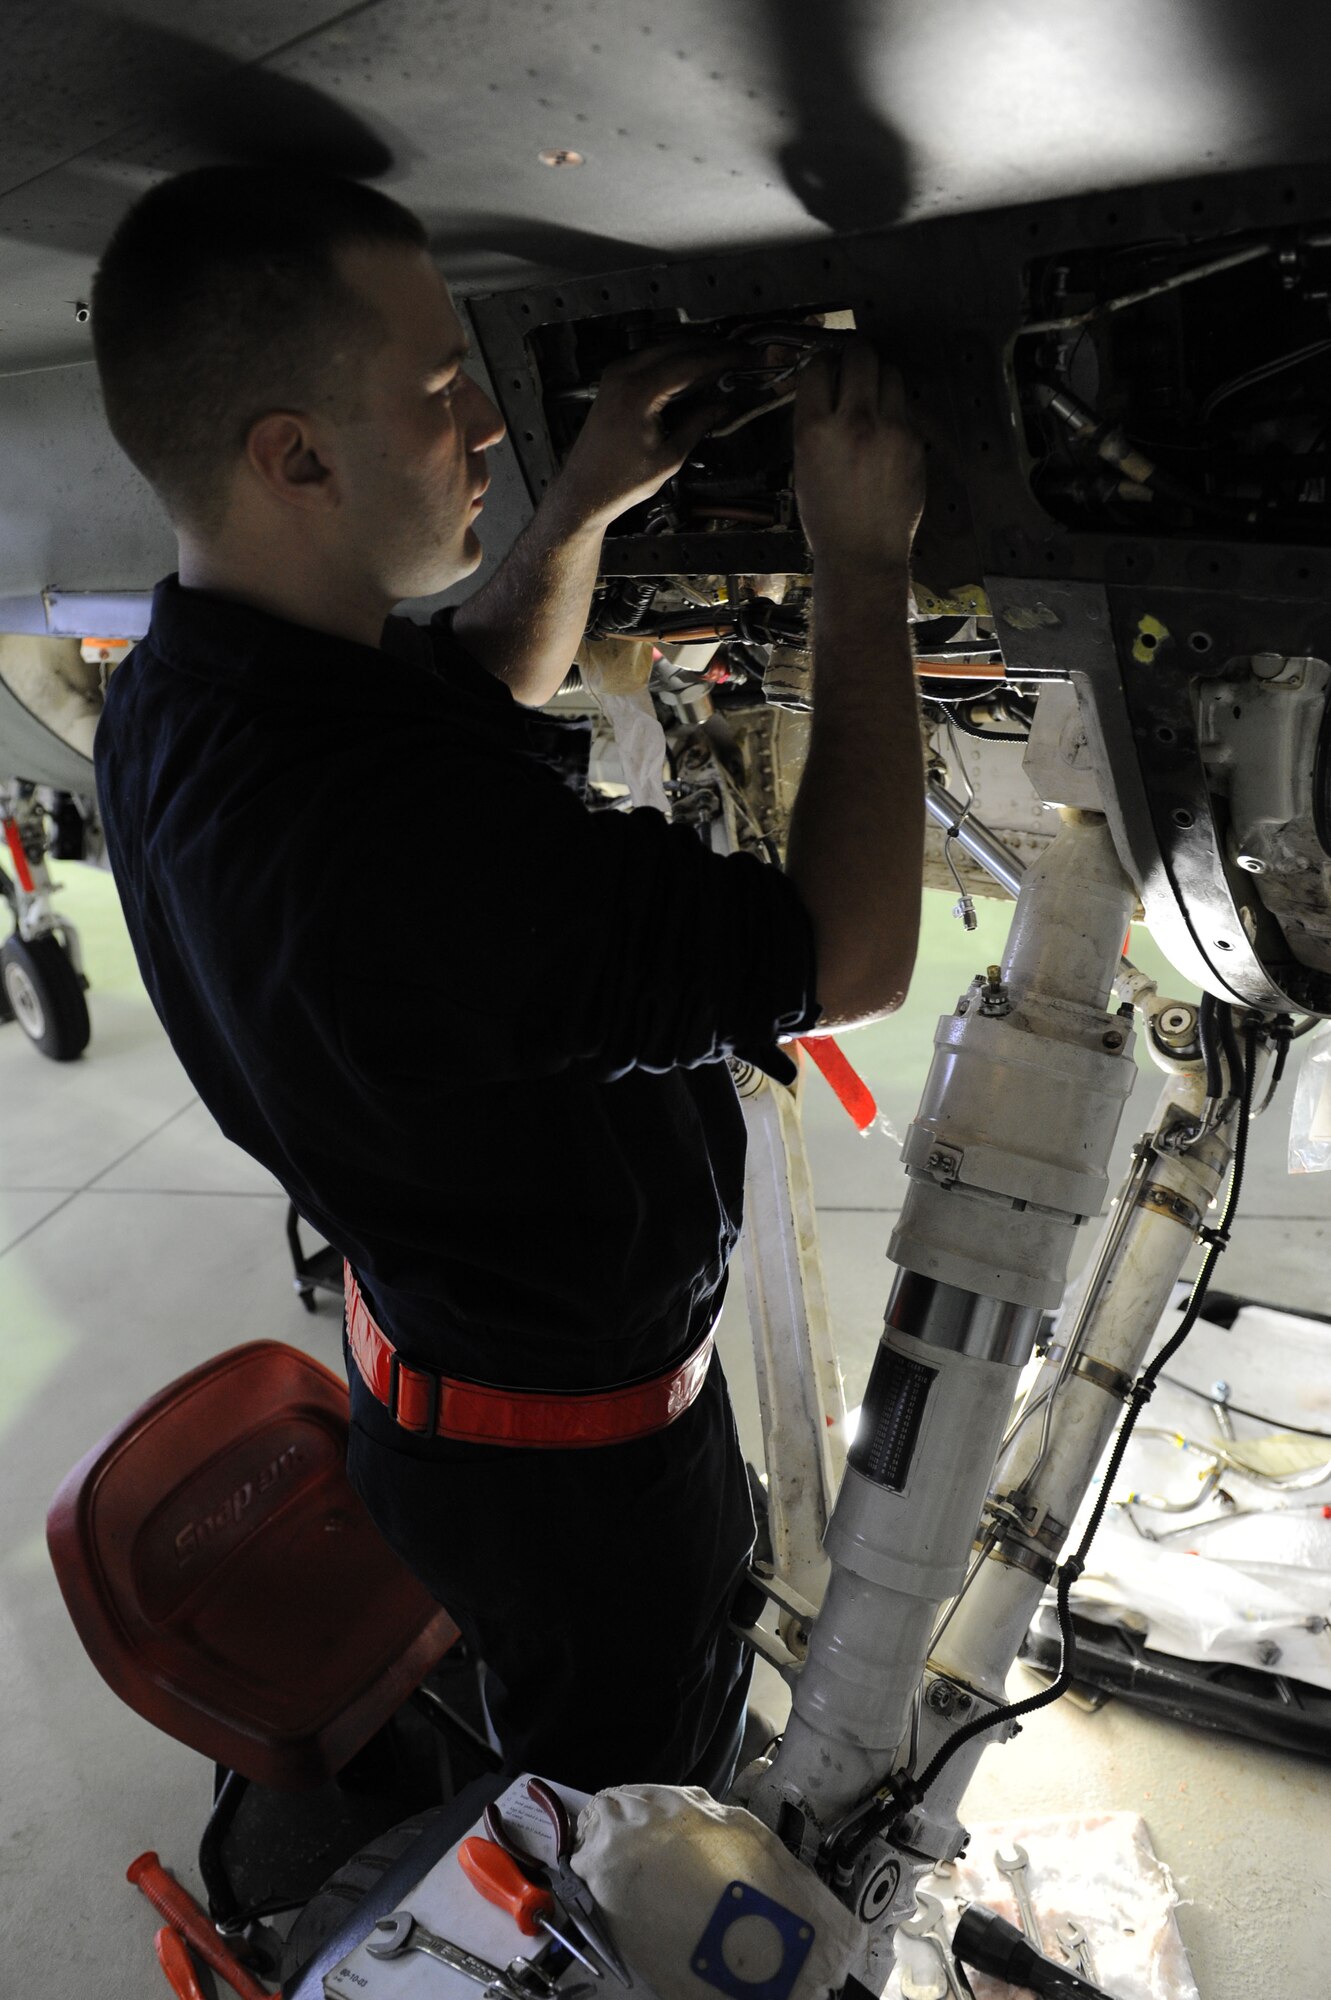 SPANGDAHLEM AIR BASE, Germany – Senior Airman Michael Wylie, 52nd Aircraft Maintenance Squadron tactical aircraft maintainer, installs a hydraulic manifold line on an F-16 Fighting Falcon during maintenance in Hangar 2 here Jan.23. Airmen perform maintence daily with different aircraft rotations to ensure the health of the 52nd Fighter Wing fleet. Wylie works to provide the mission-capable aircraft through scheduled maintenance as part of the 480th Aircraft Maintenance Unit. (U.S. Air Force photo/Senior Airman Christopher Toon)